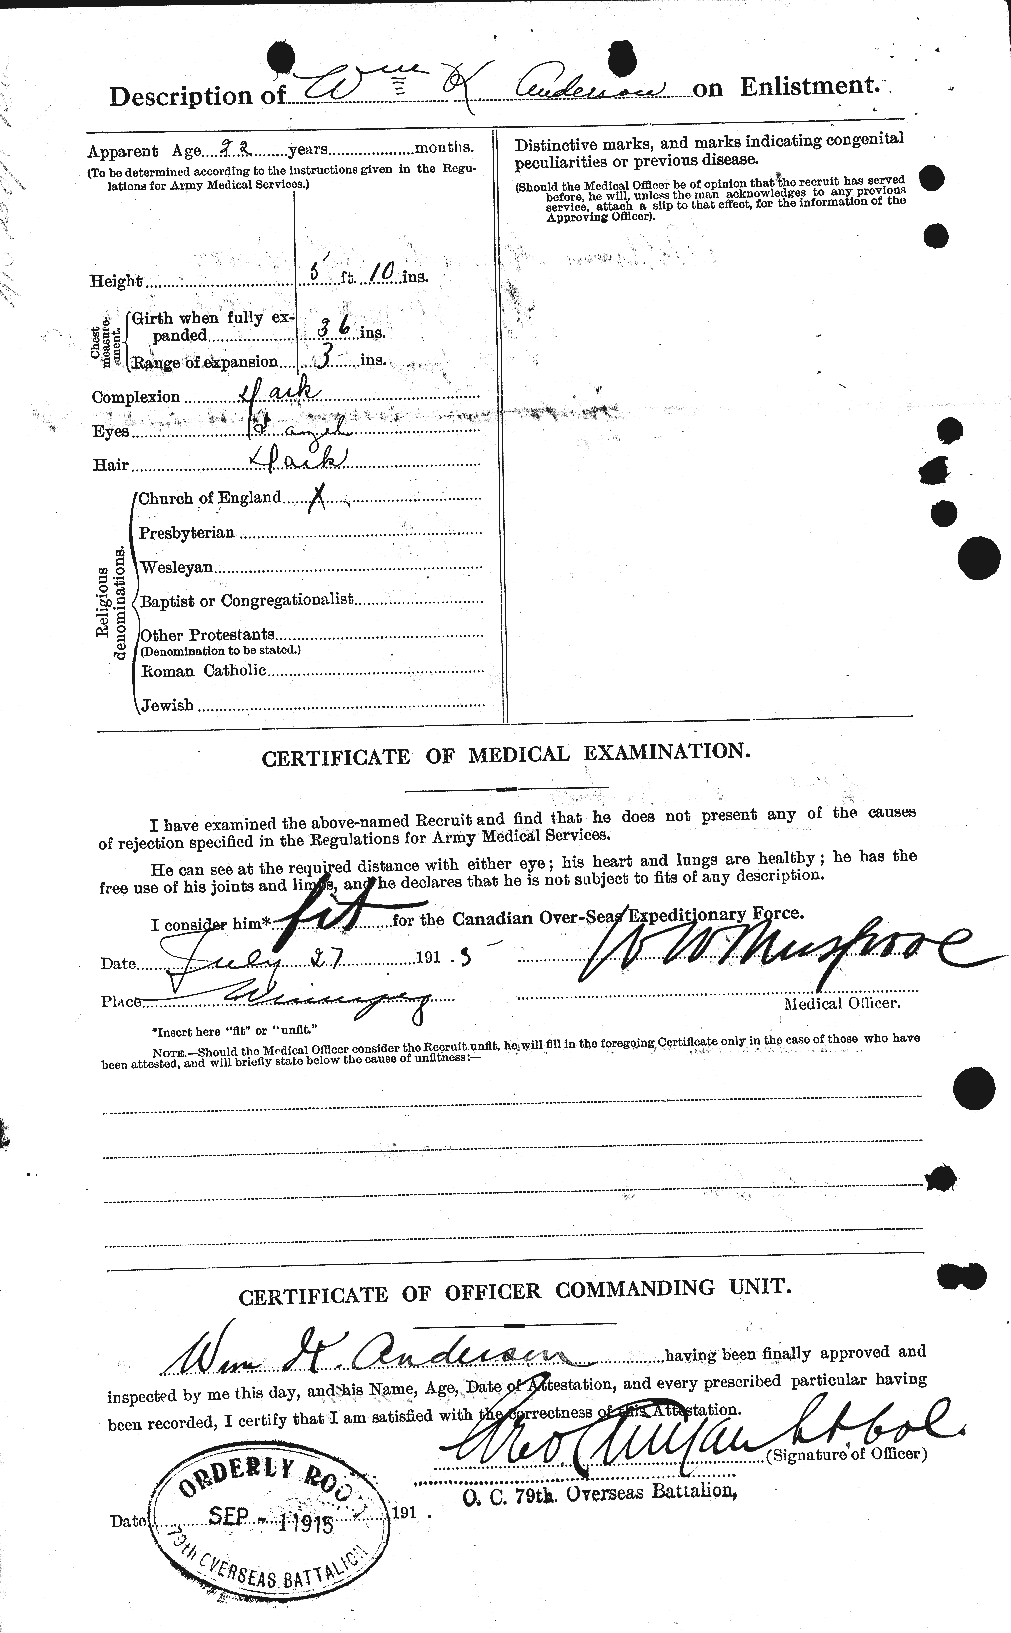 Personnel Records of the First World War - CEF 210688b